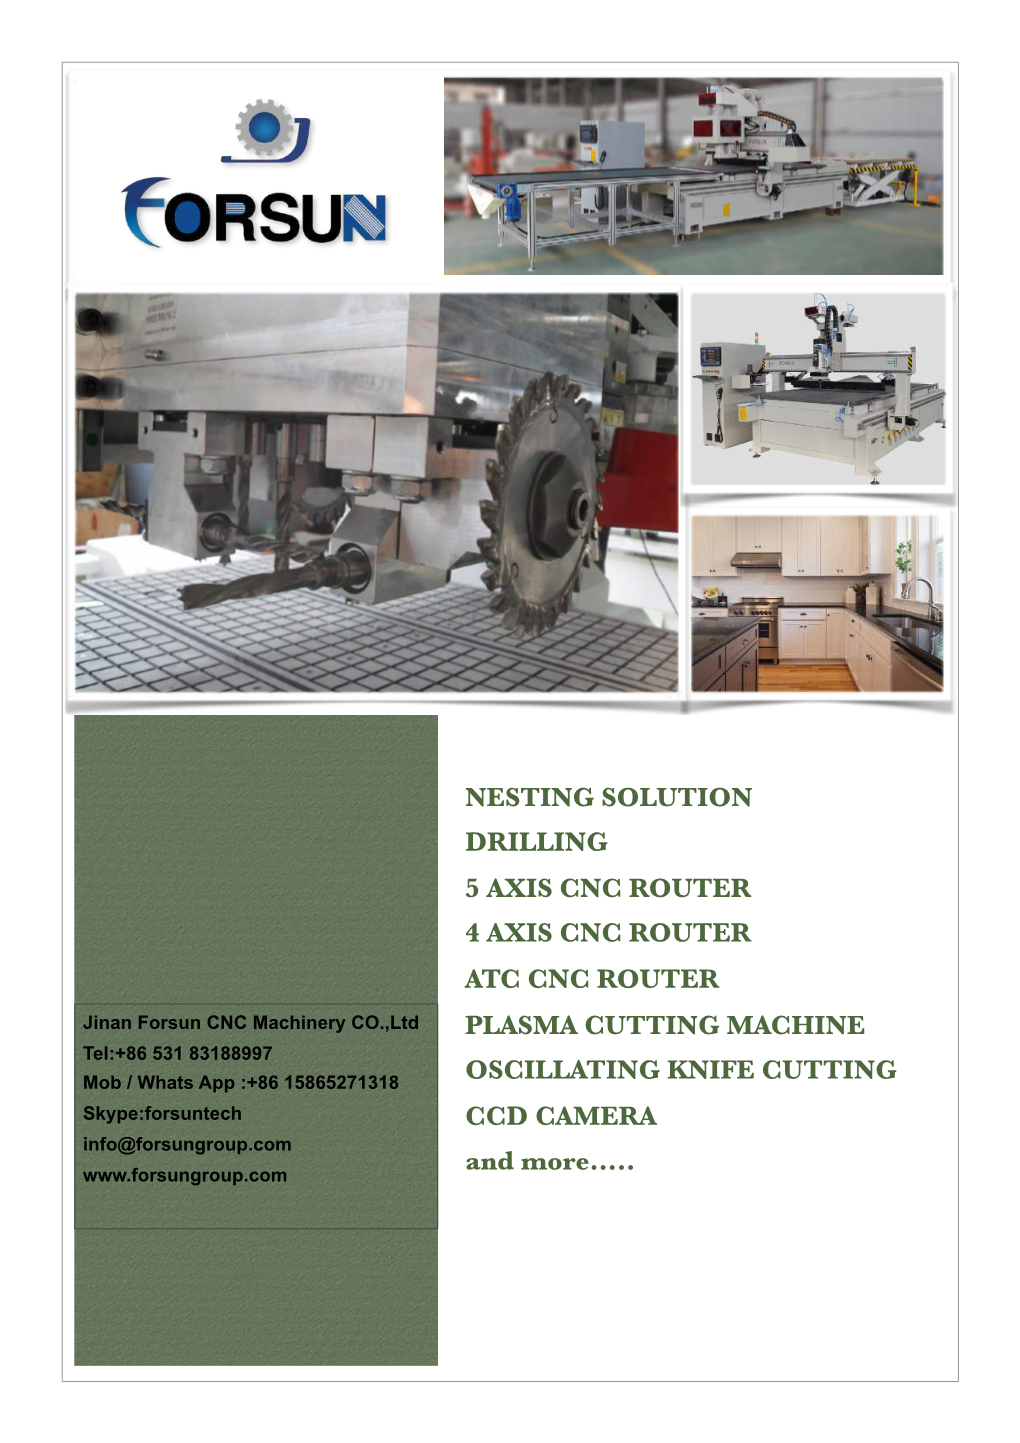 New Catalogue of Forsun